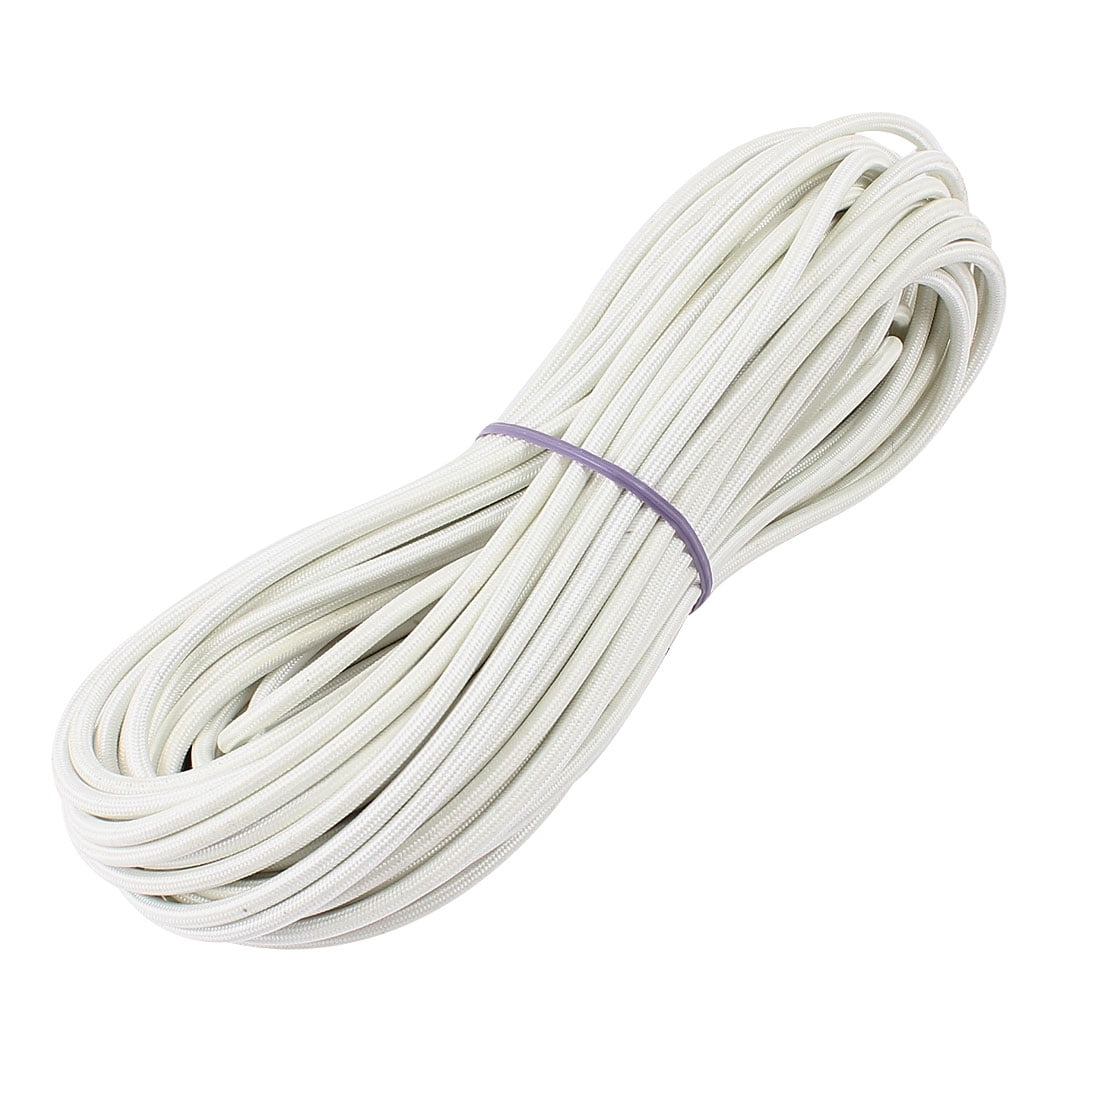 2.5mm2 Flexible Heat Resistance High Temp Wire Cable 15 Meter Length 